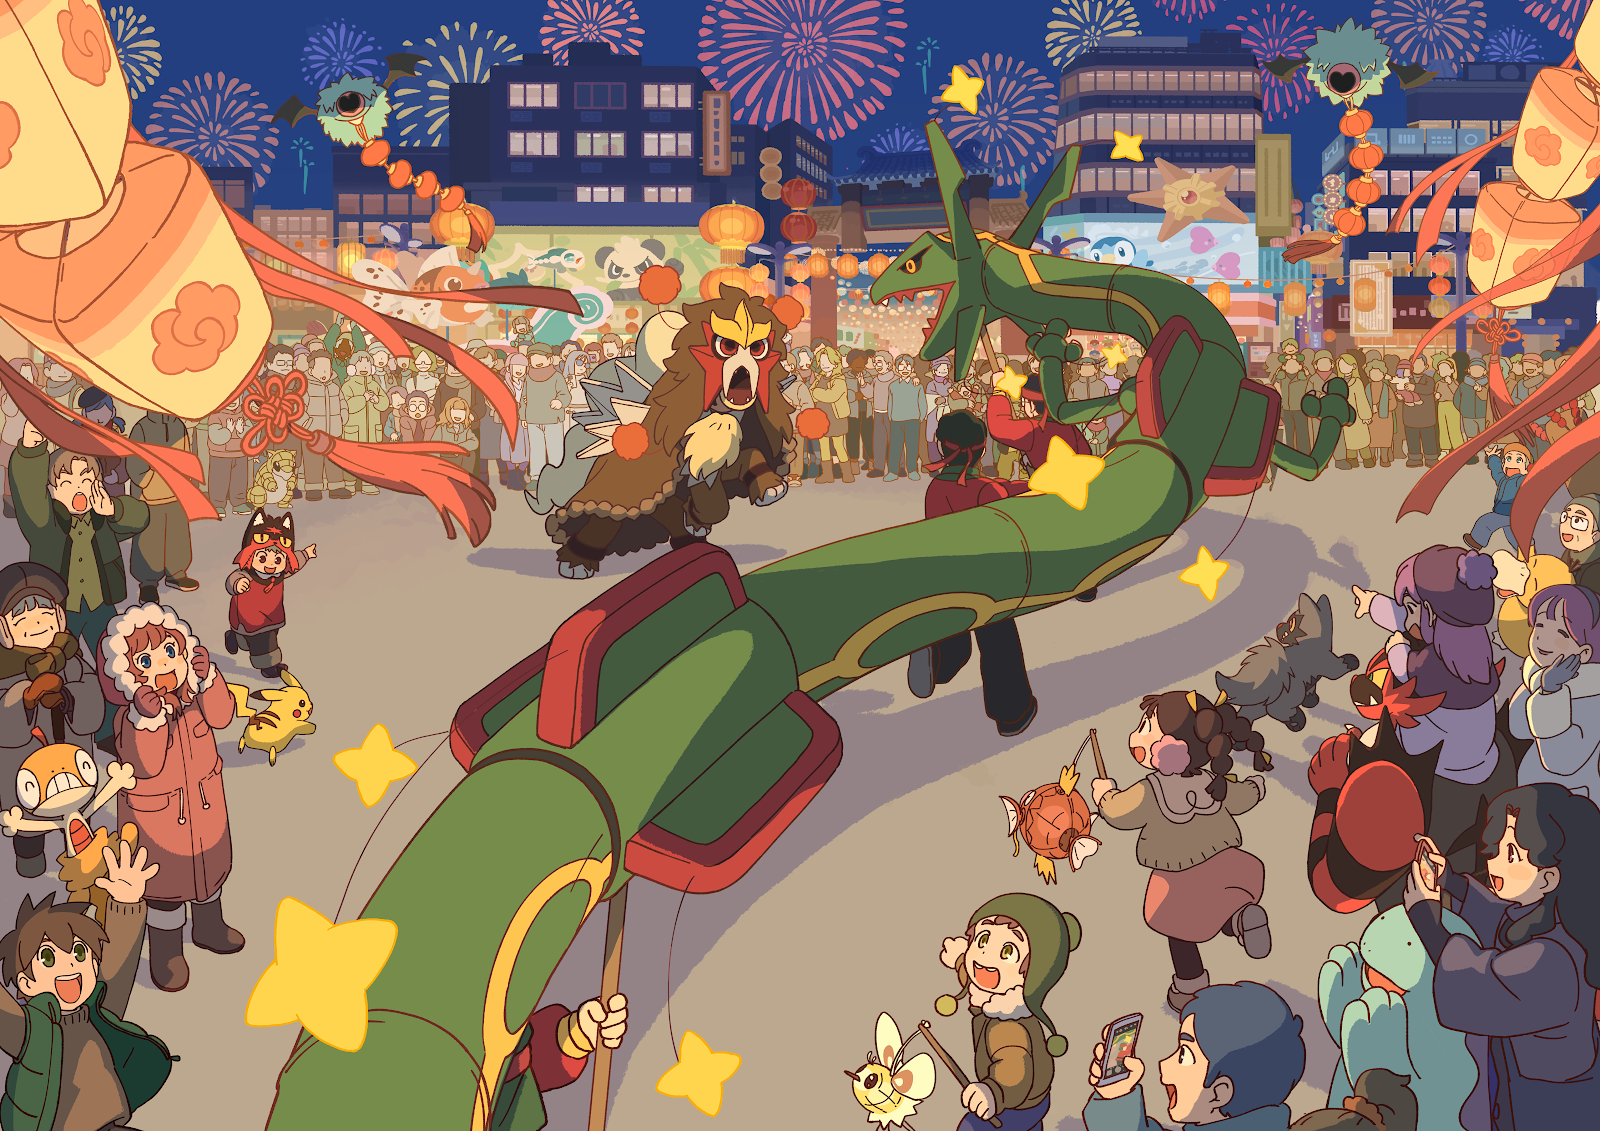 Rayquaza and Entei dragon dances for a Lunar New Year celebration